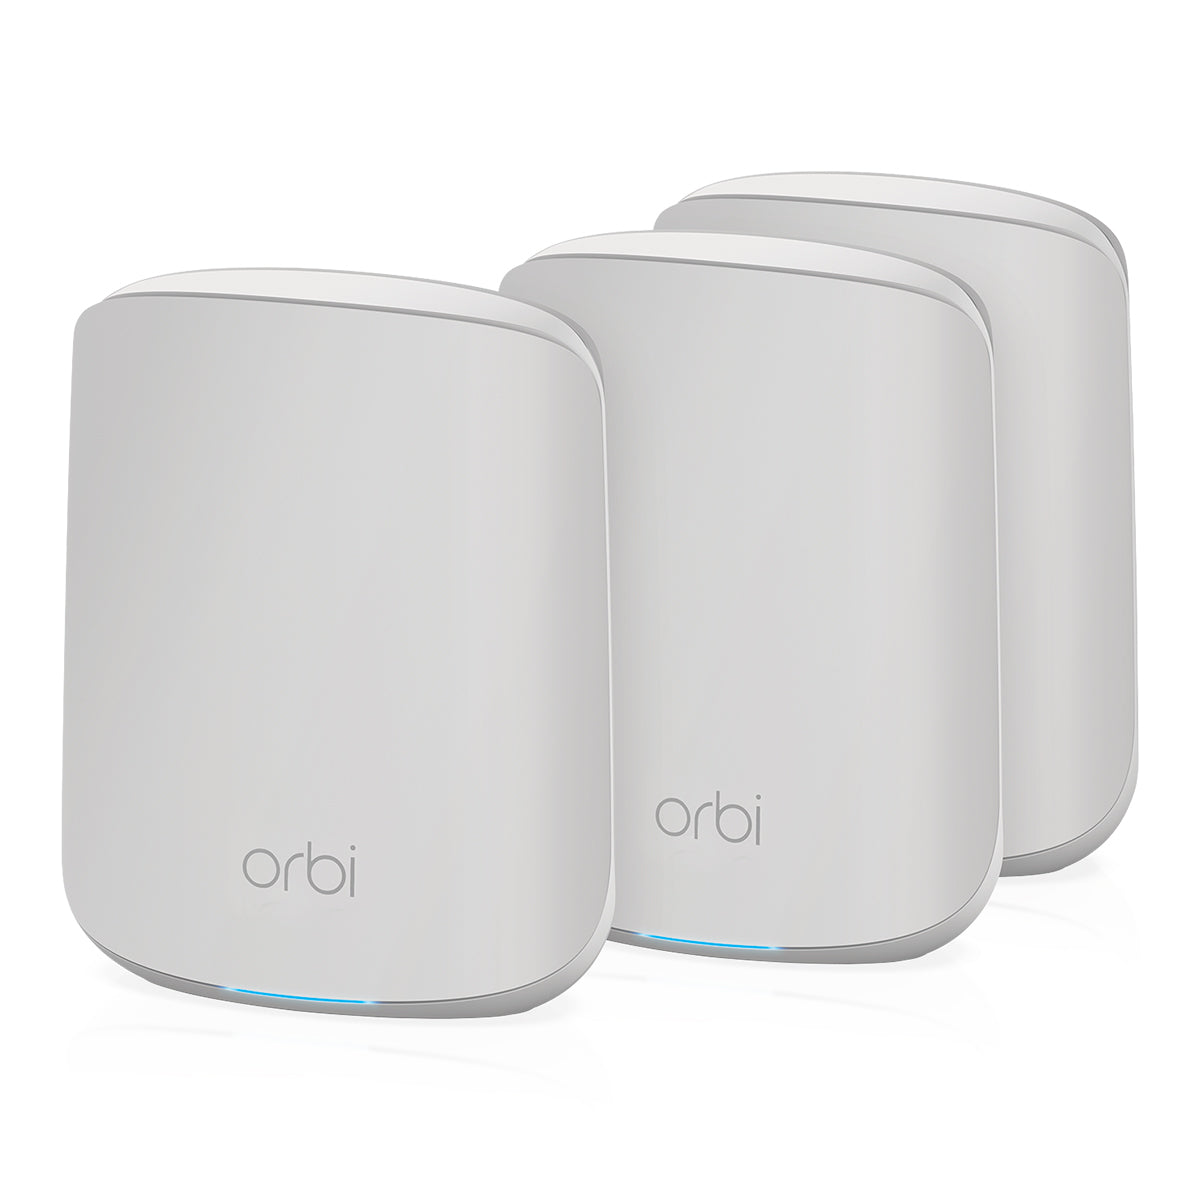 NETGEAR Orbi RBK353 - Wi-Fi System (router, 2 extenders) - up to 3230 square feet - networking - GigE - 802.11a/b/g/n/ac/ax - Dual Band